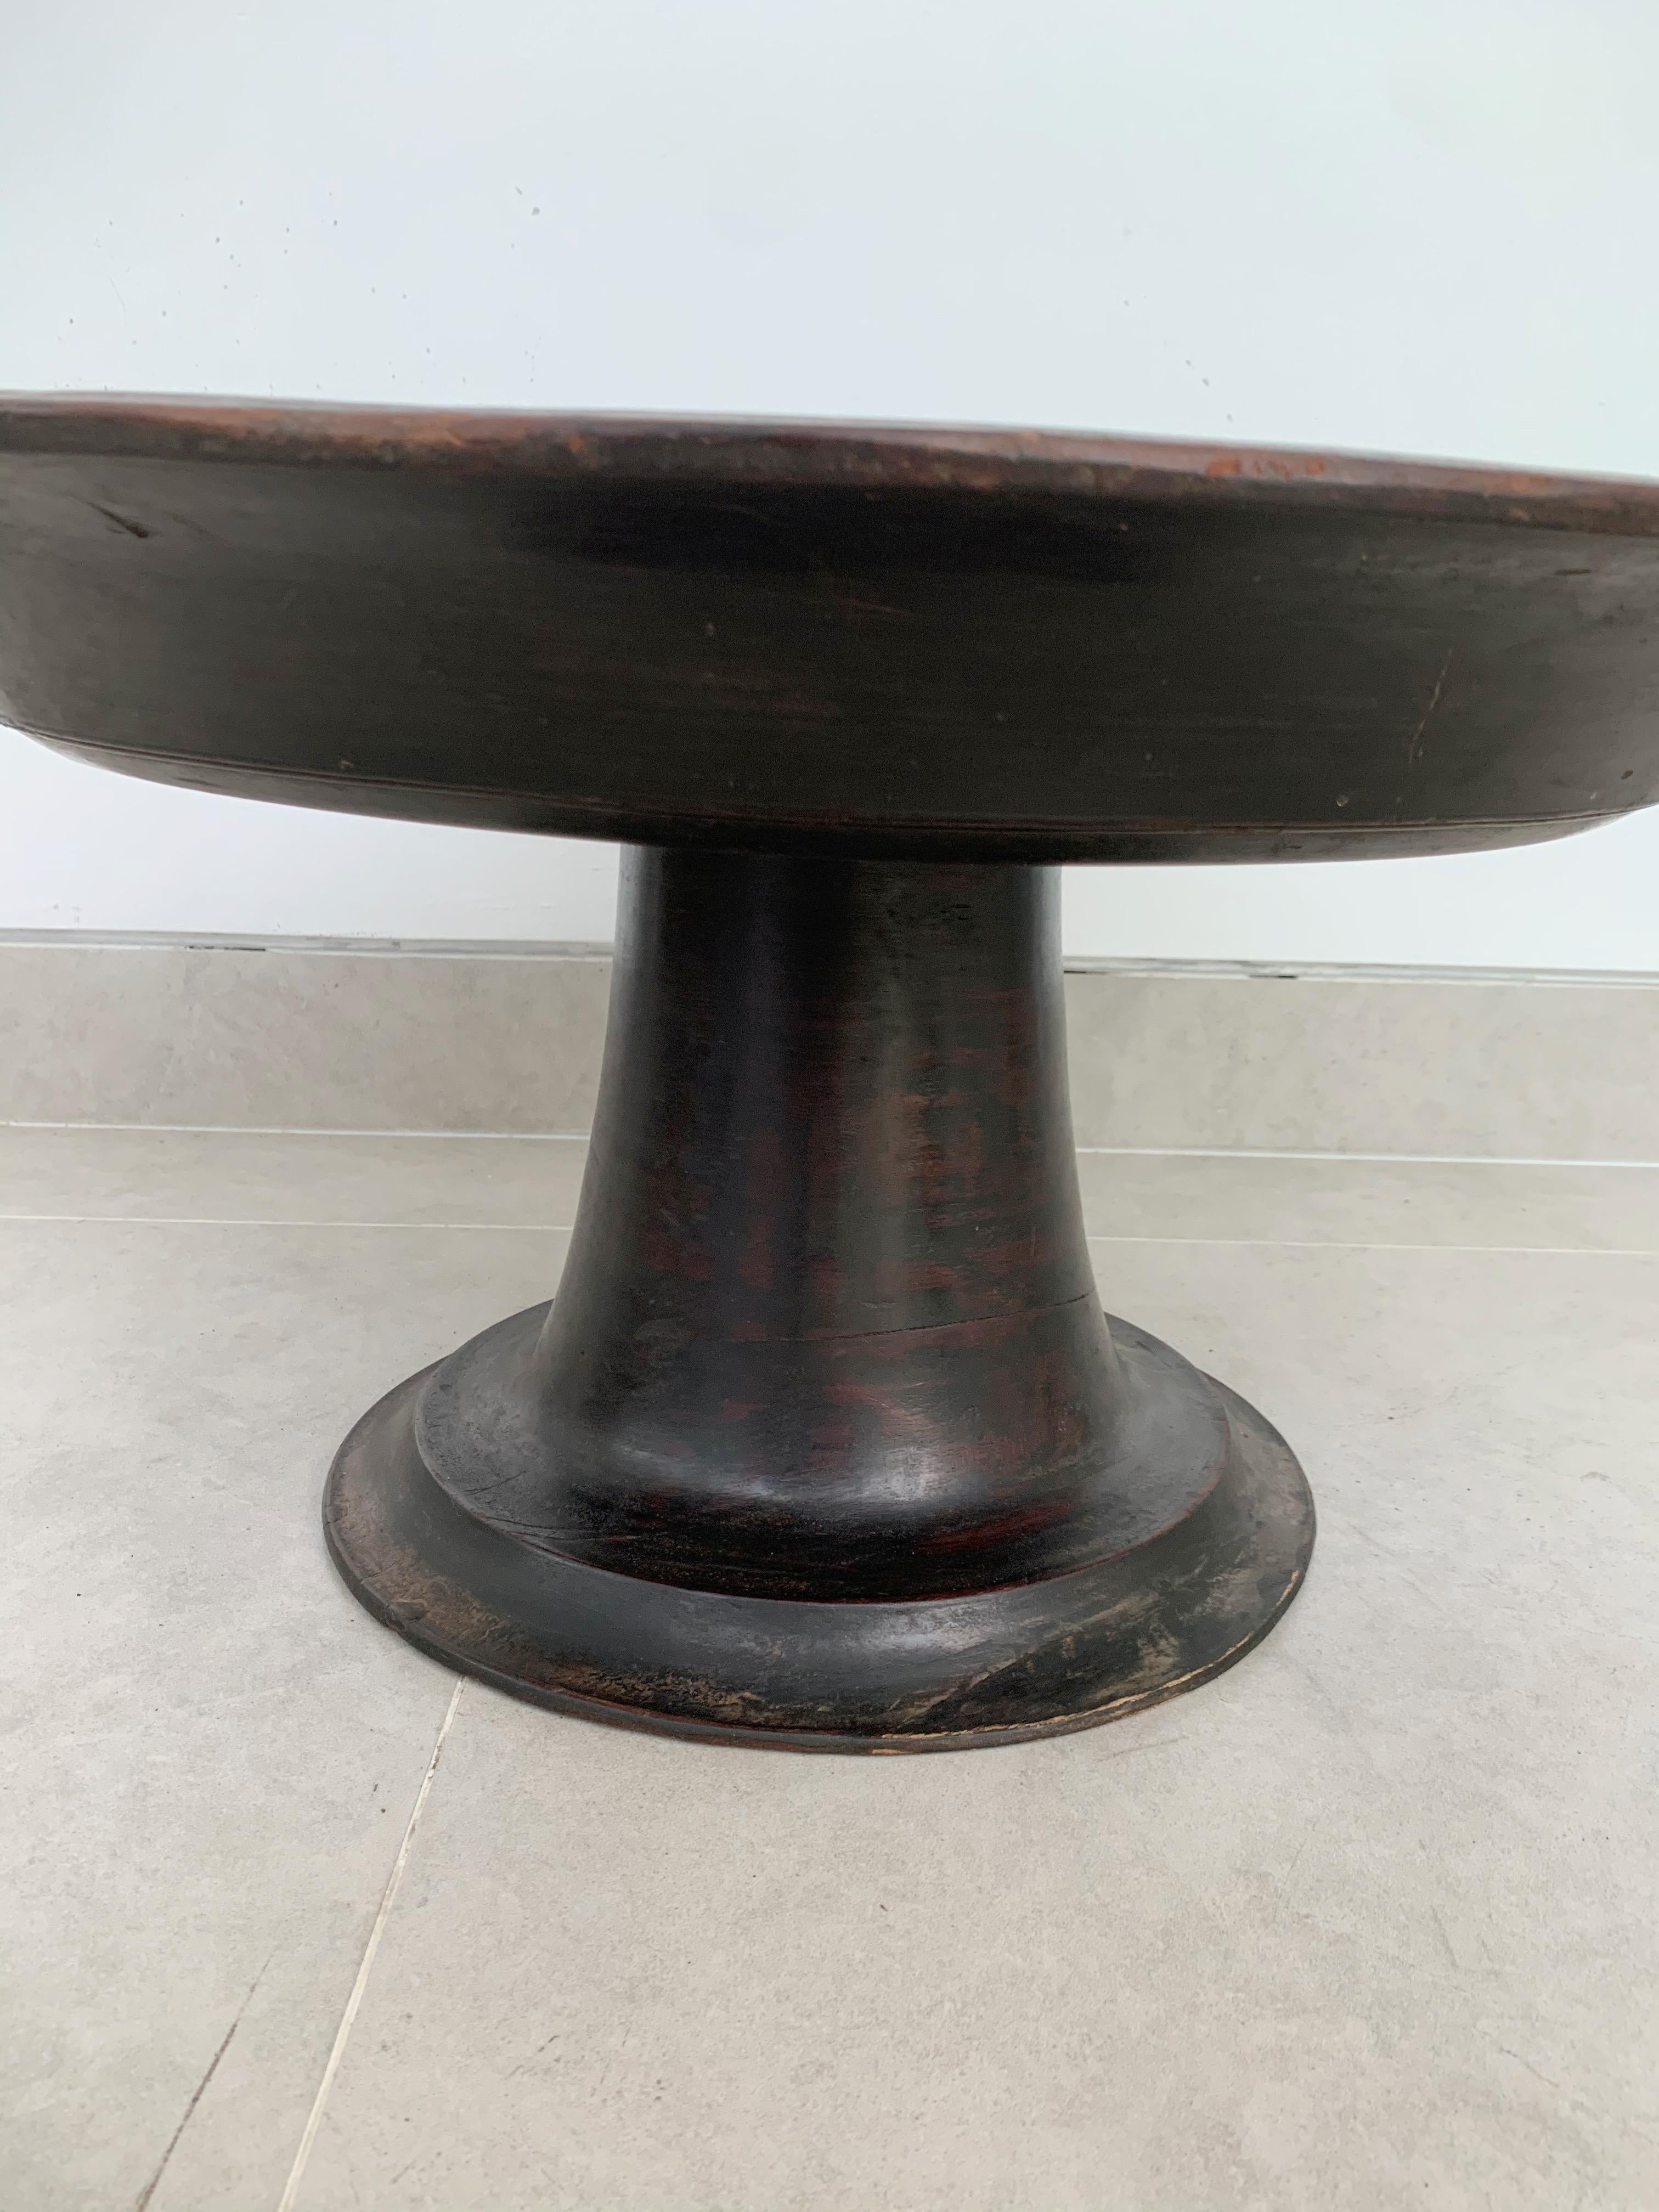 Balinese Lombok Tribal Tray / Bowl 'Dulang' / Small Table For Sale